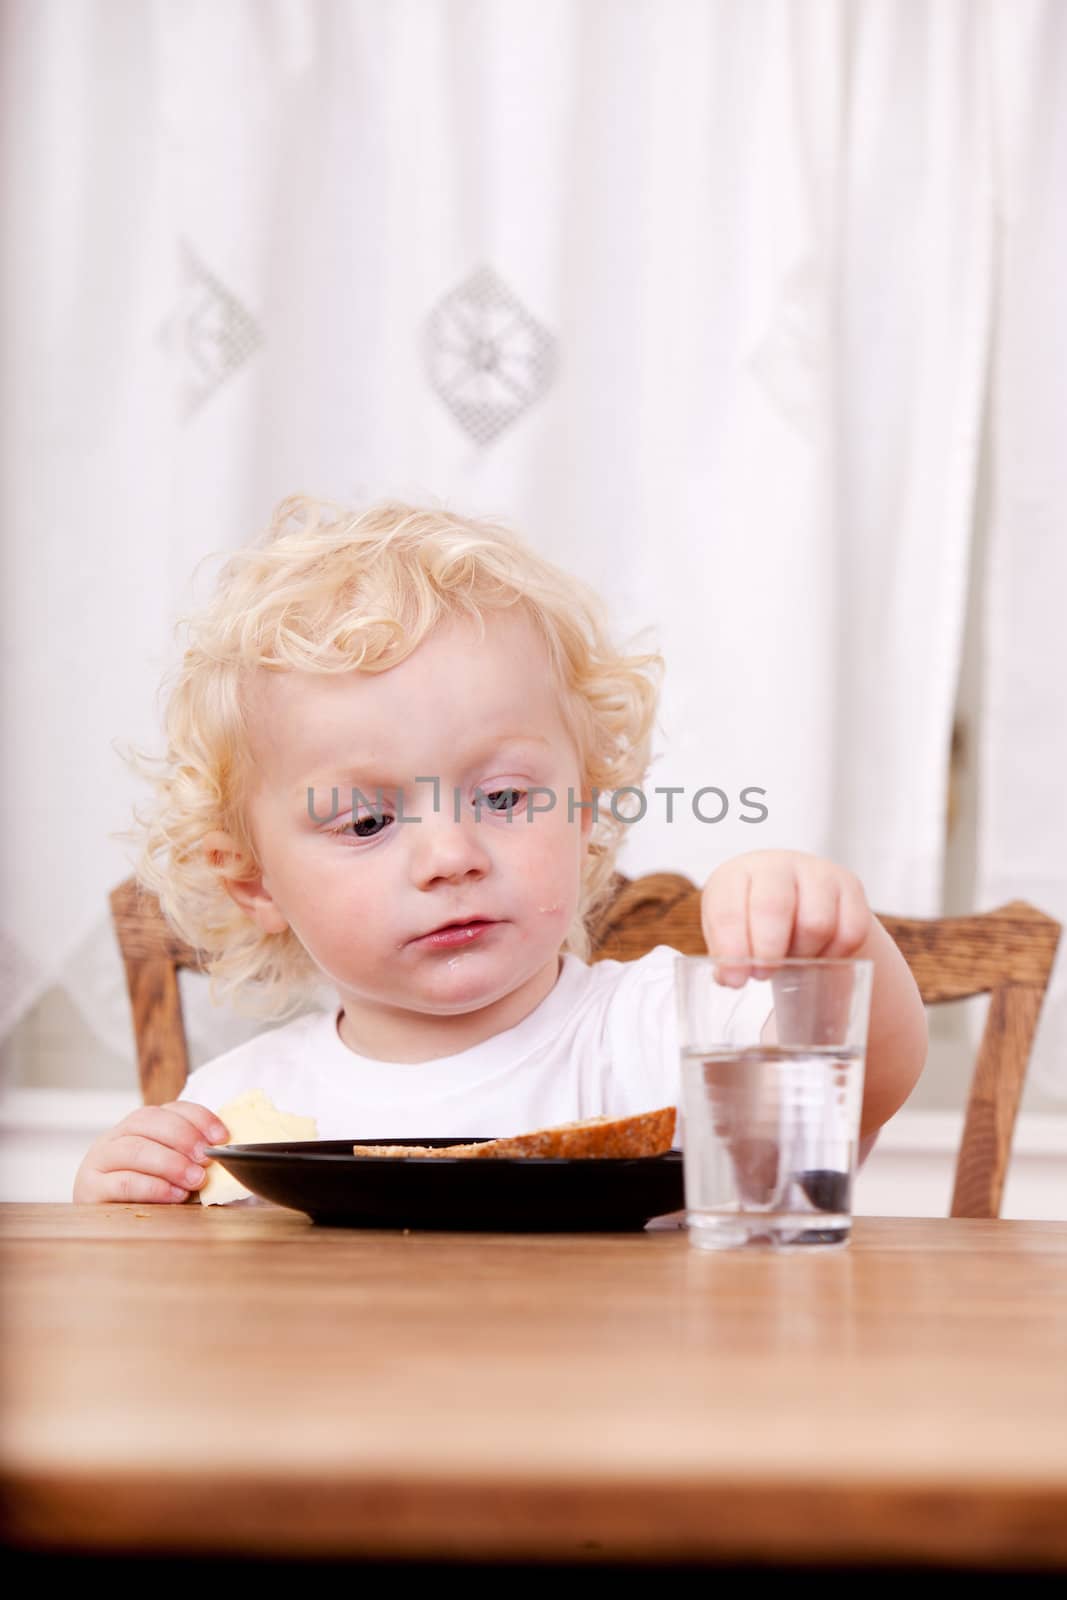 A young child sitting a a table reaching for glass of water